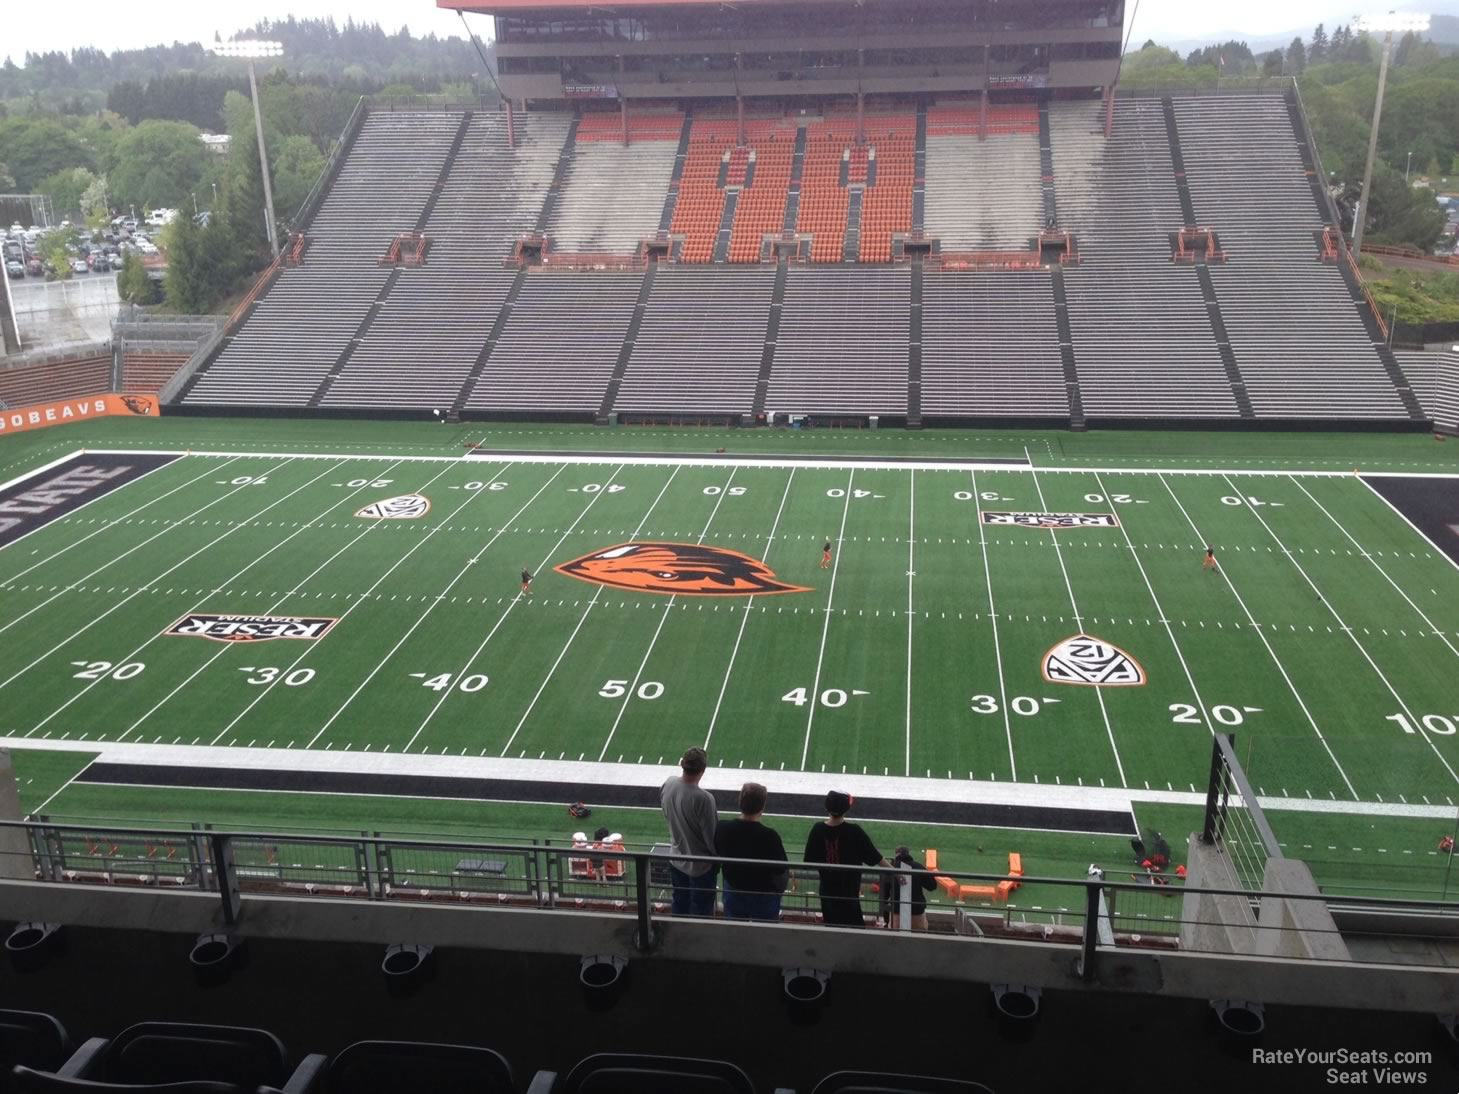 section 219, row 16 seat view  - reser stadium